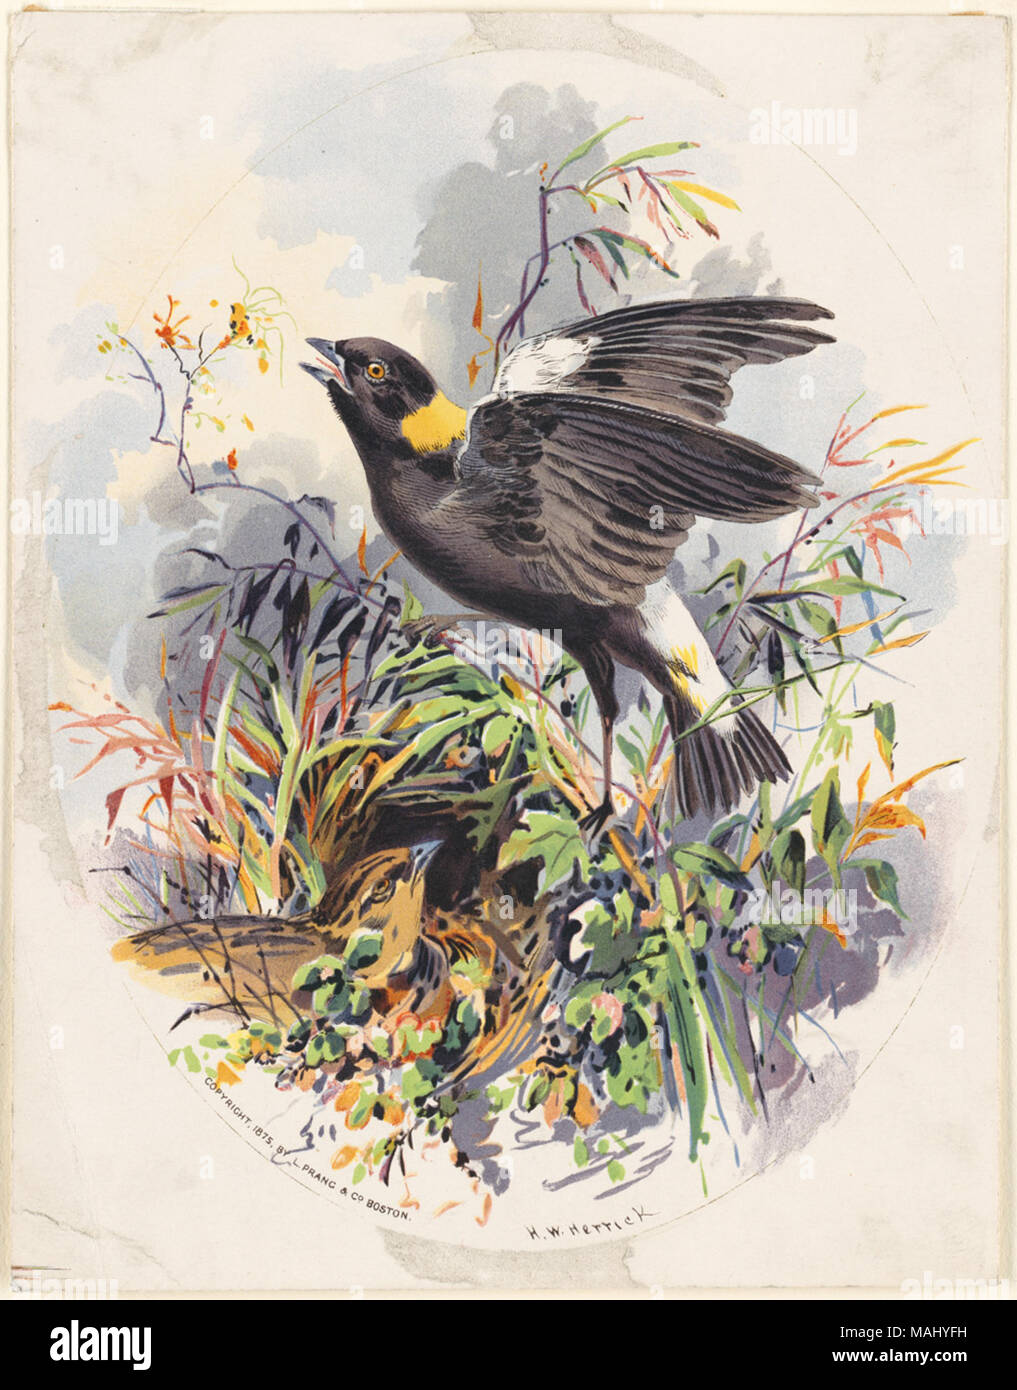 07 11 000766 Title: Bird Family in Nest Among Grasses Creator/Contributor: Herrick, Henry Walker, 1824-1906 (artist); L. Prang & Co. (publisher) Date issued:  1875 Physical description note: Genre: Chromolithographs Location: Boston Public Library,    on 2011-08-06: Camera: Sinar AG Sinarback 54 FW, Sinar m Stock Photo